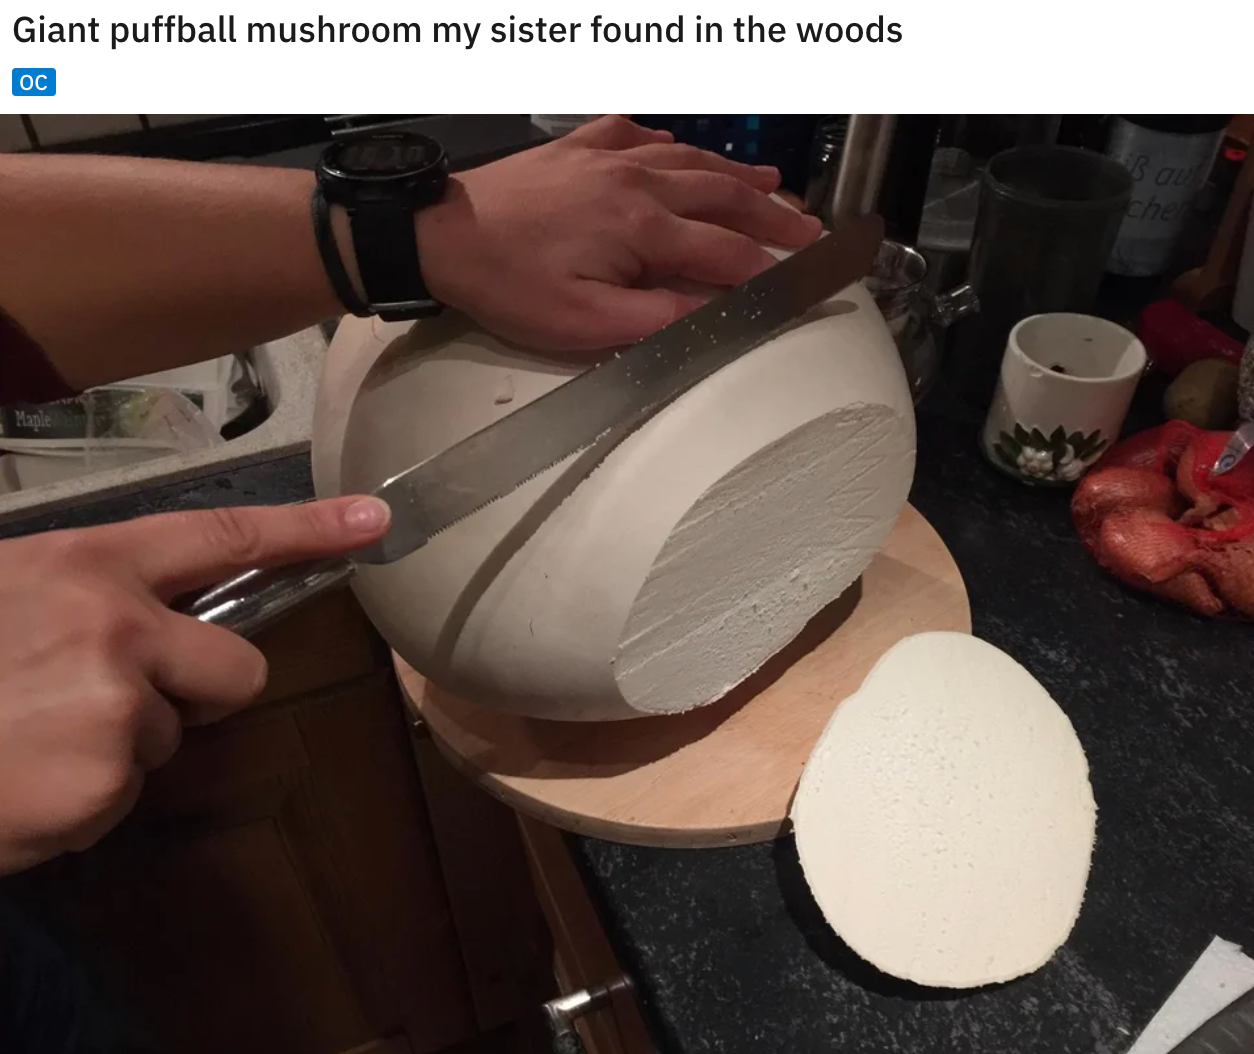 cool and funny pics - Giant puffball mushroom my sister found in the woods